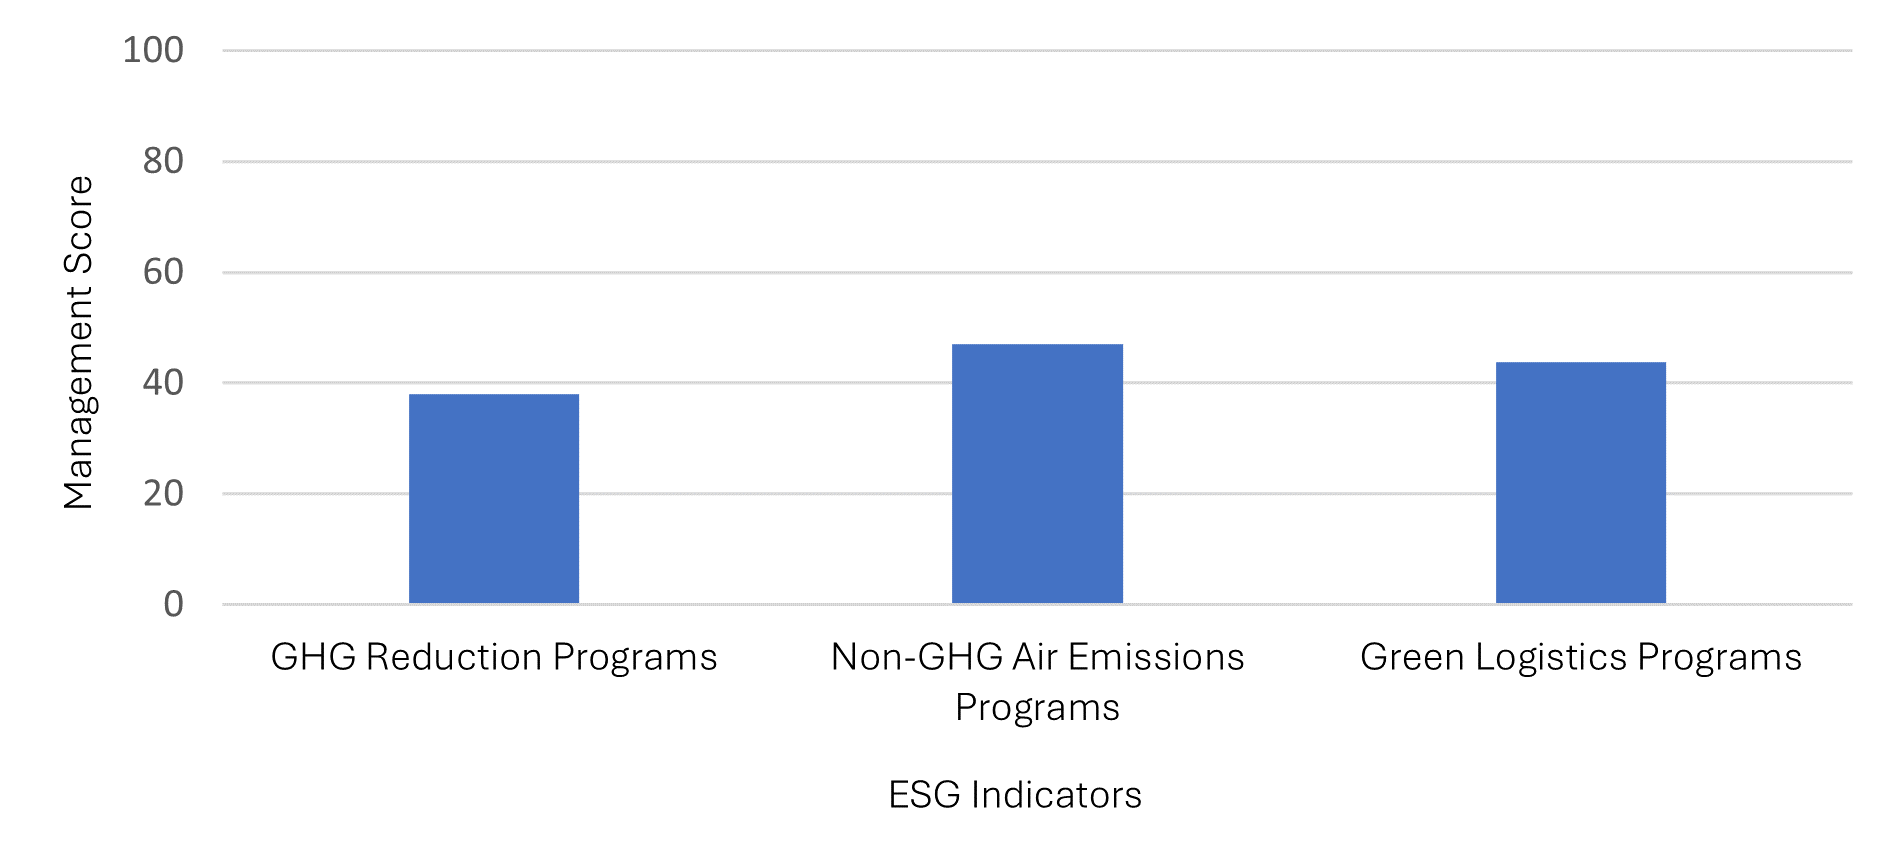 Figure 1. Average Management Scores of Select ESG Indicators for the Shipping Industry